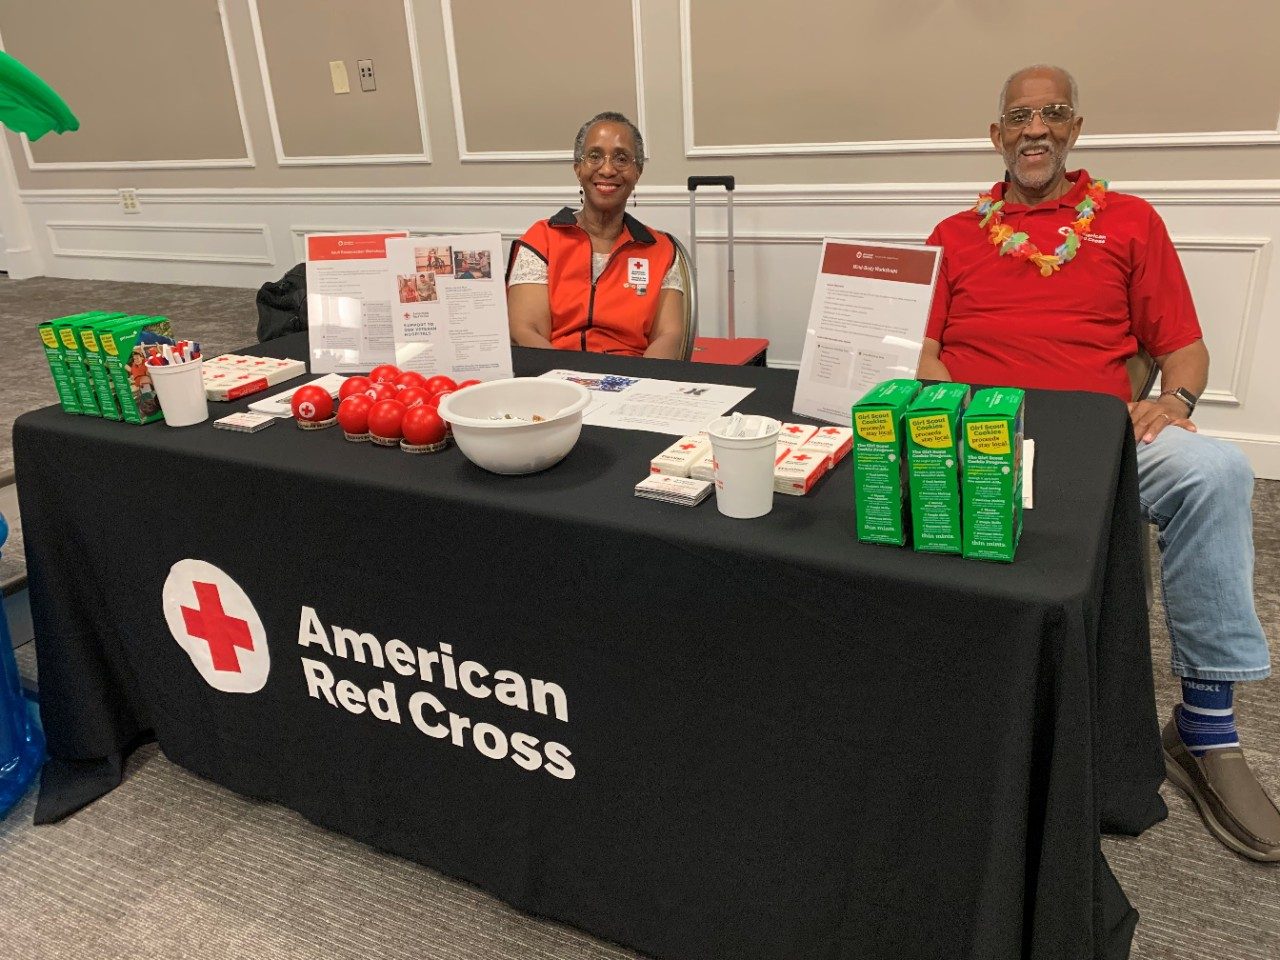 two red cross volunteers at a table with red cross supplies